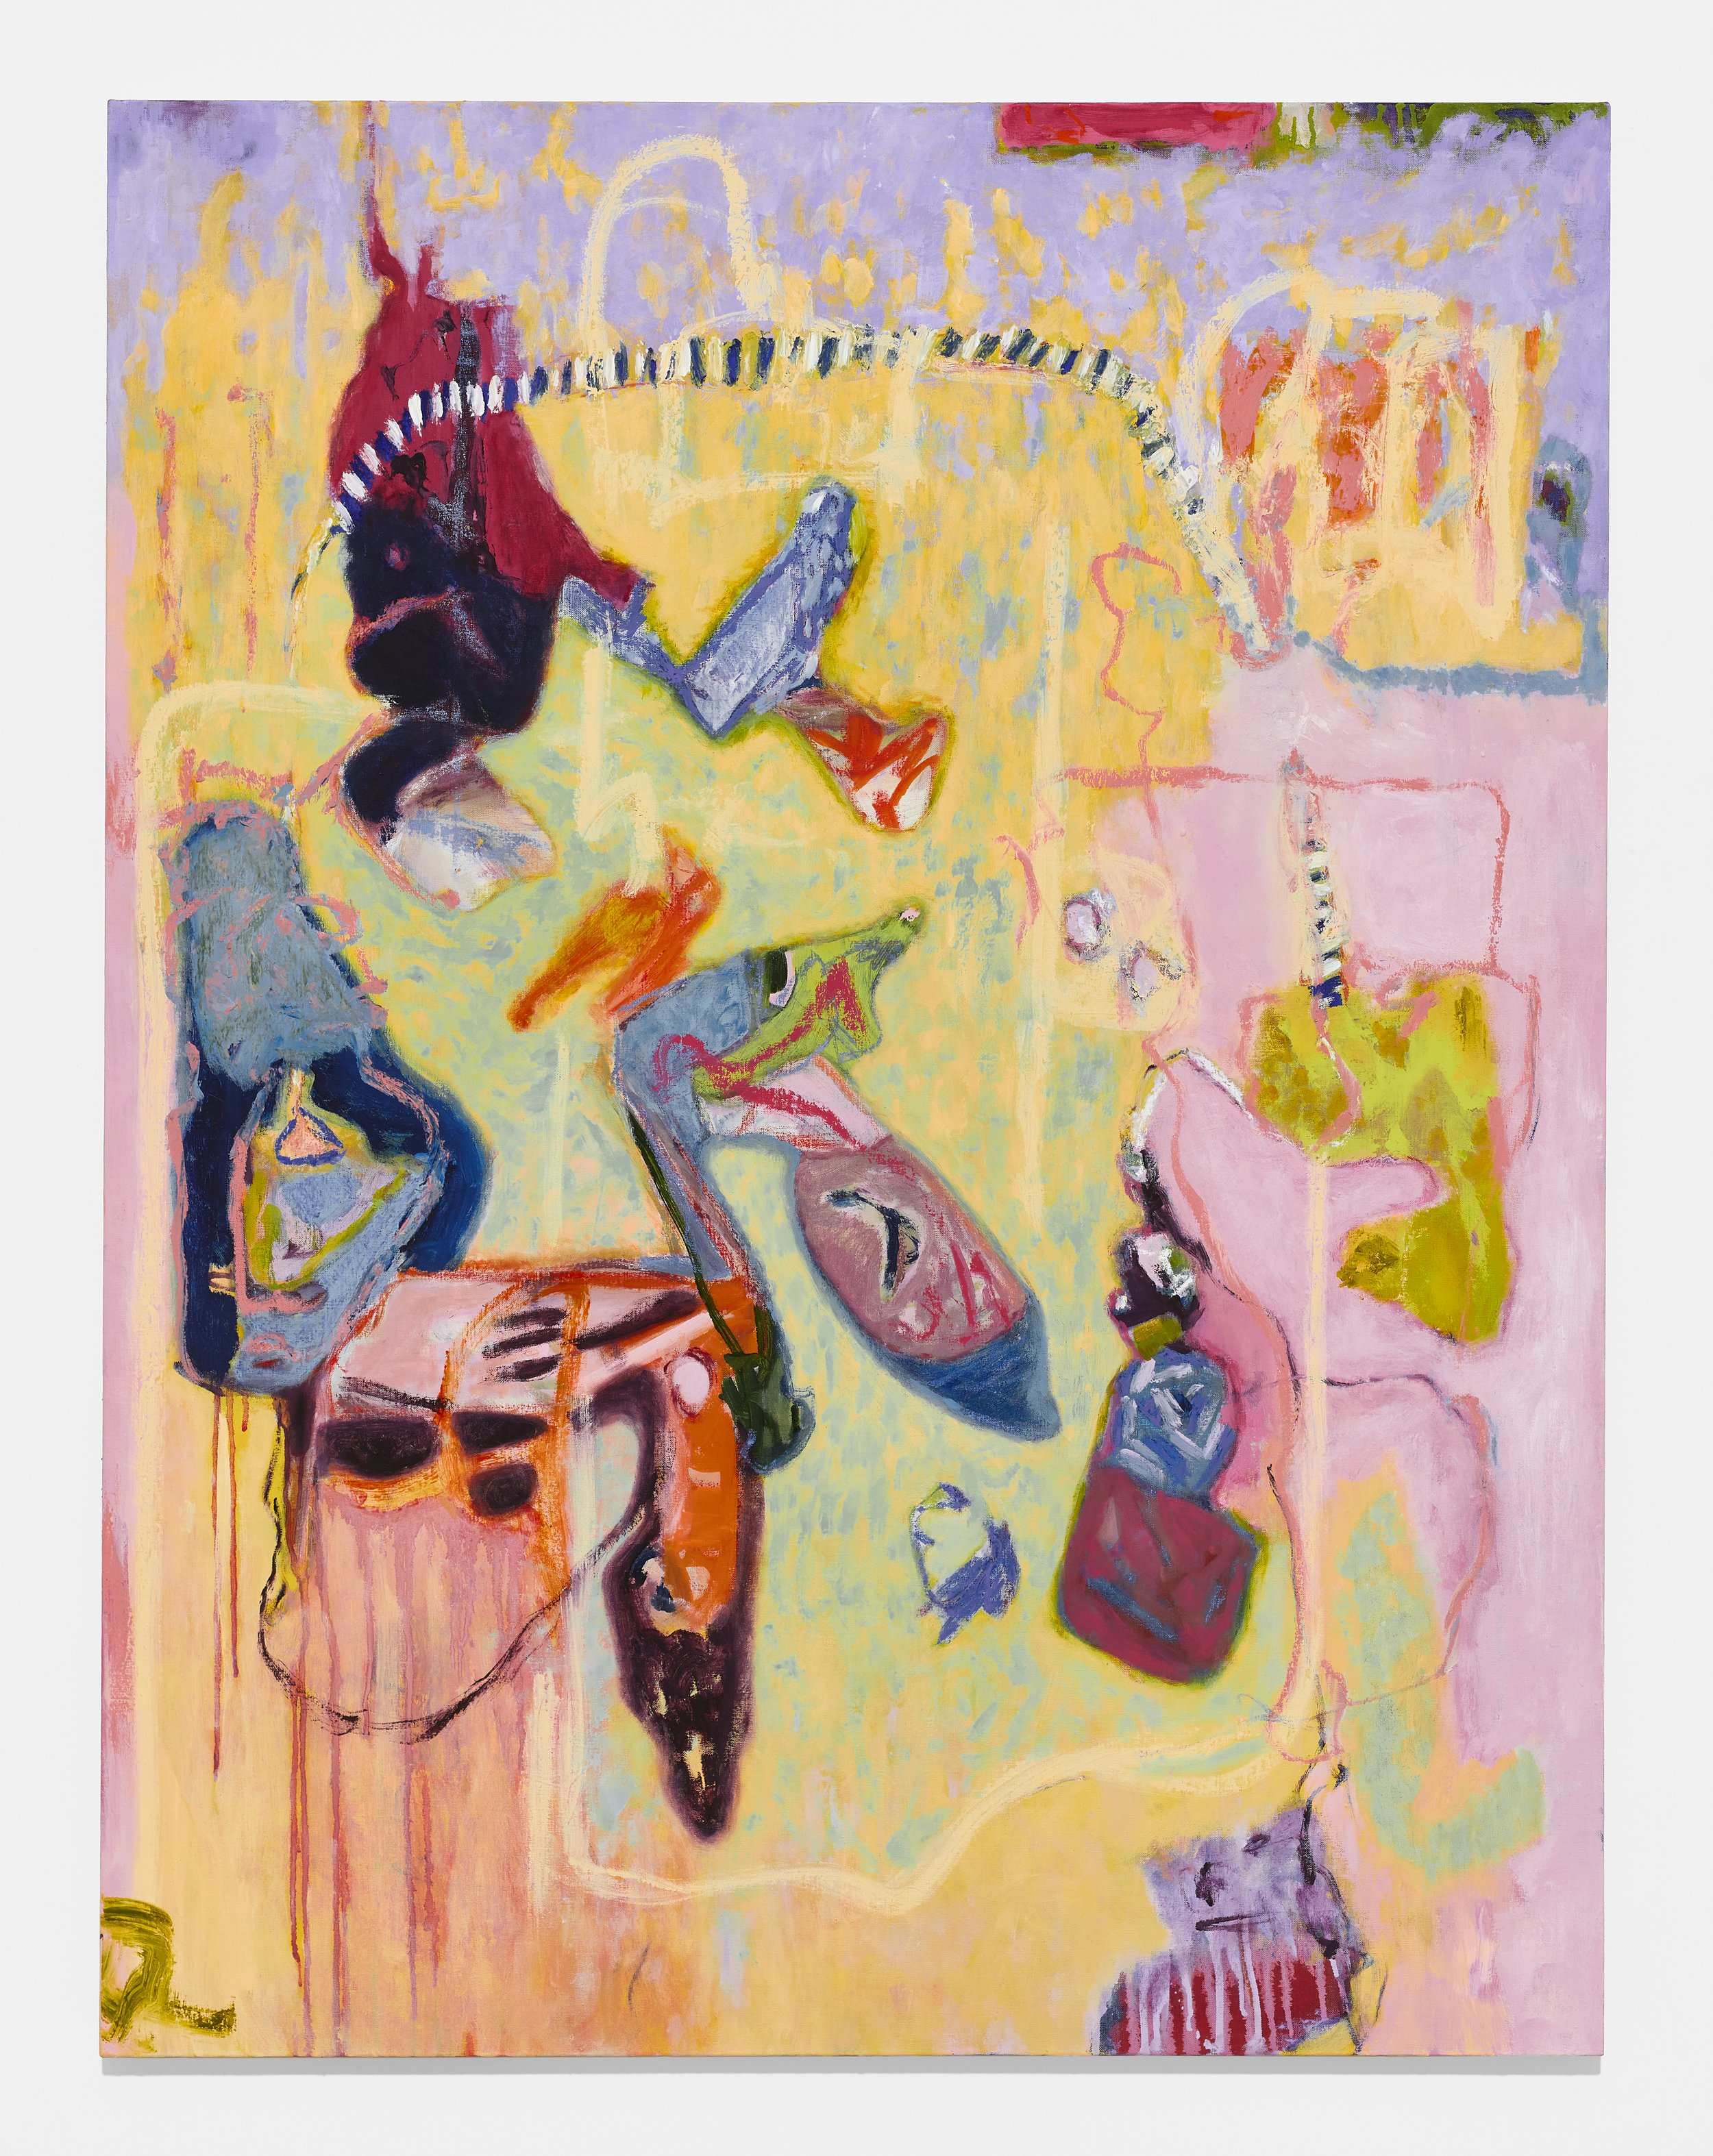   Sarah Dwyer,   Bathing on the Roof,  2023. Oil and pastel on linen, 51 x 39.5 inches.  